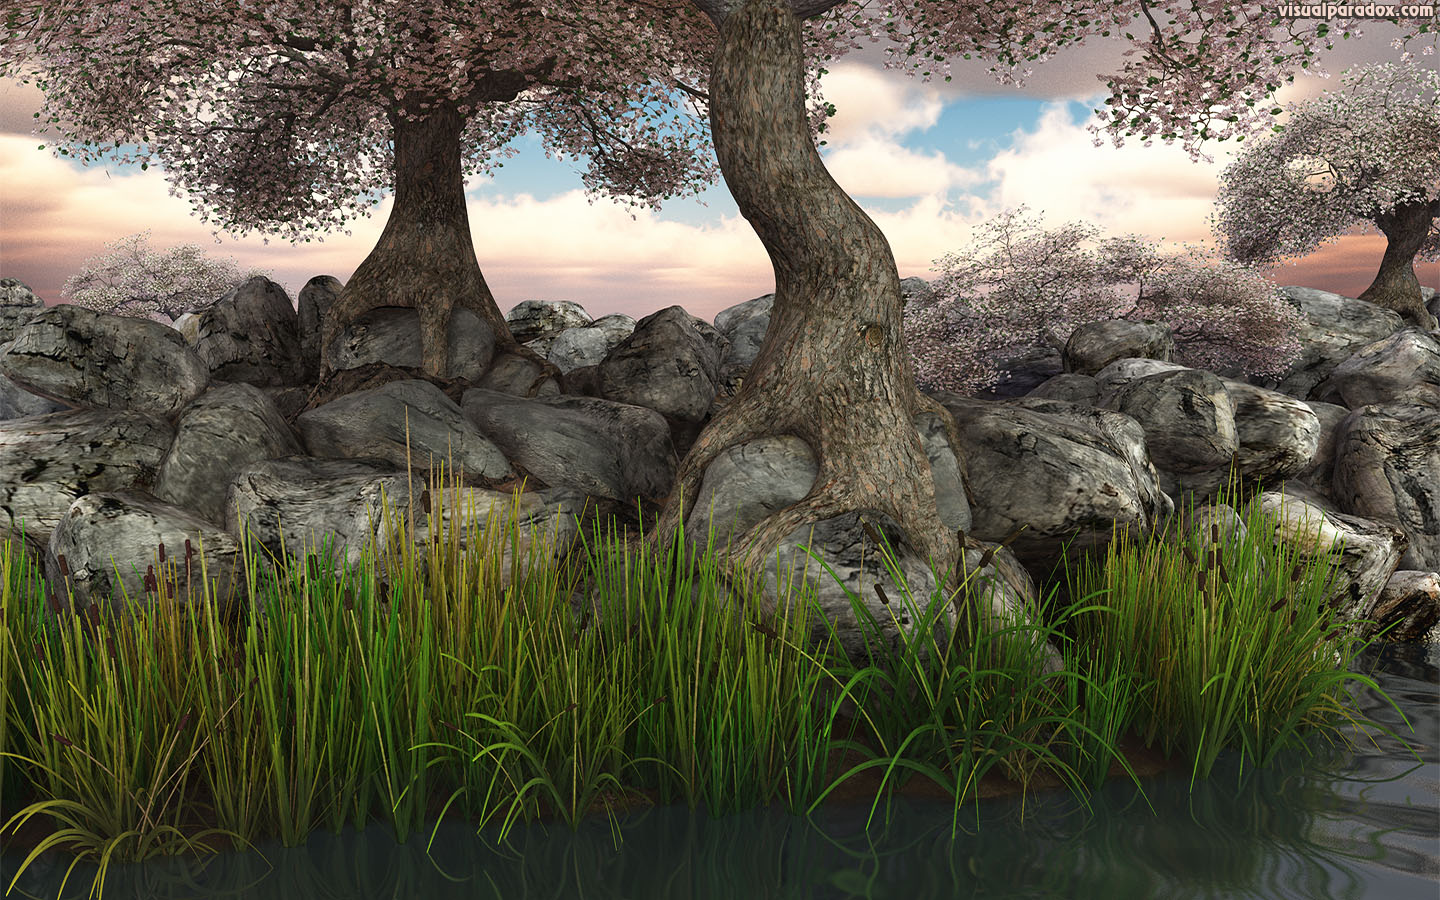 trees, blossoms, flowers, reeds, lake, pond, river, rocks, roots, knarled, tree, root, 3d, wallpaper, widescreen